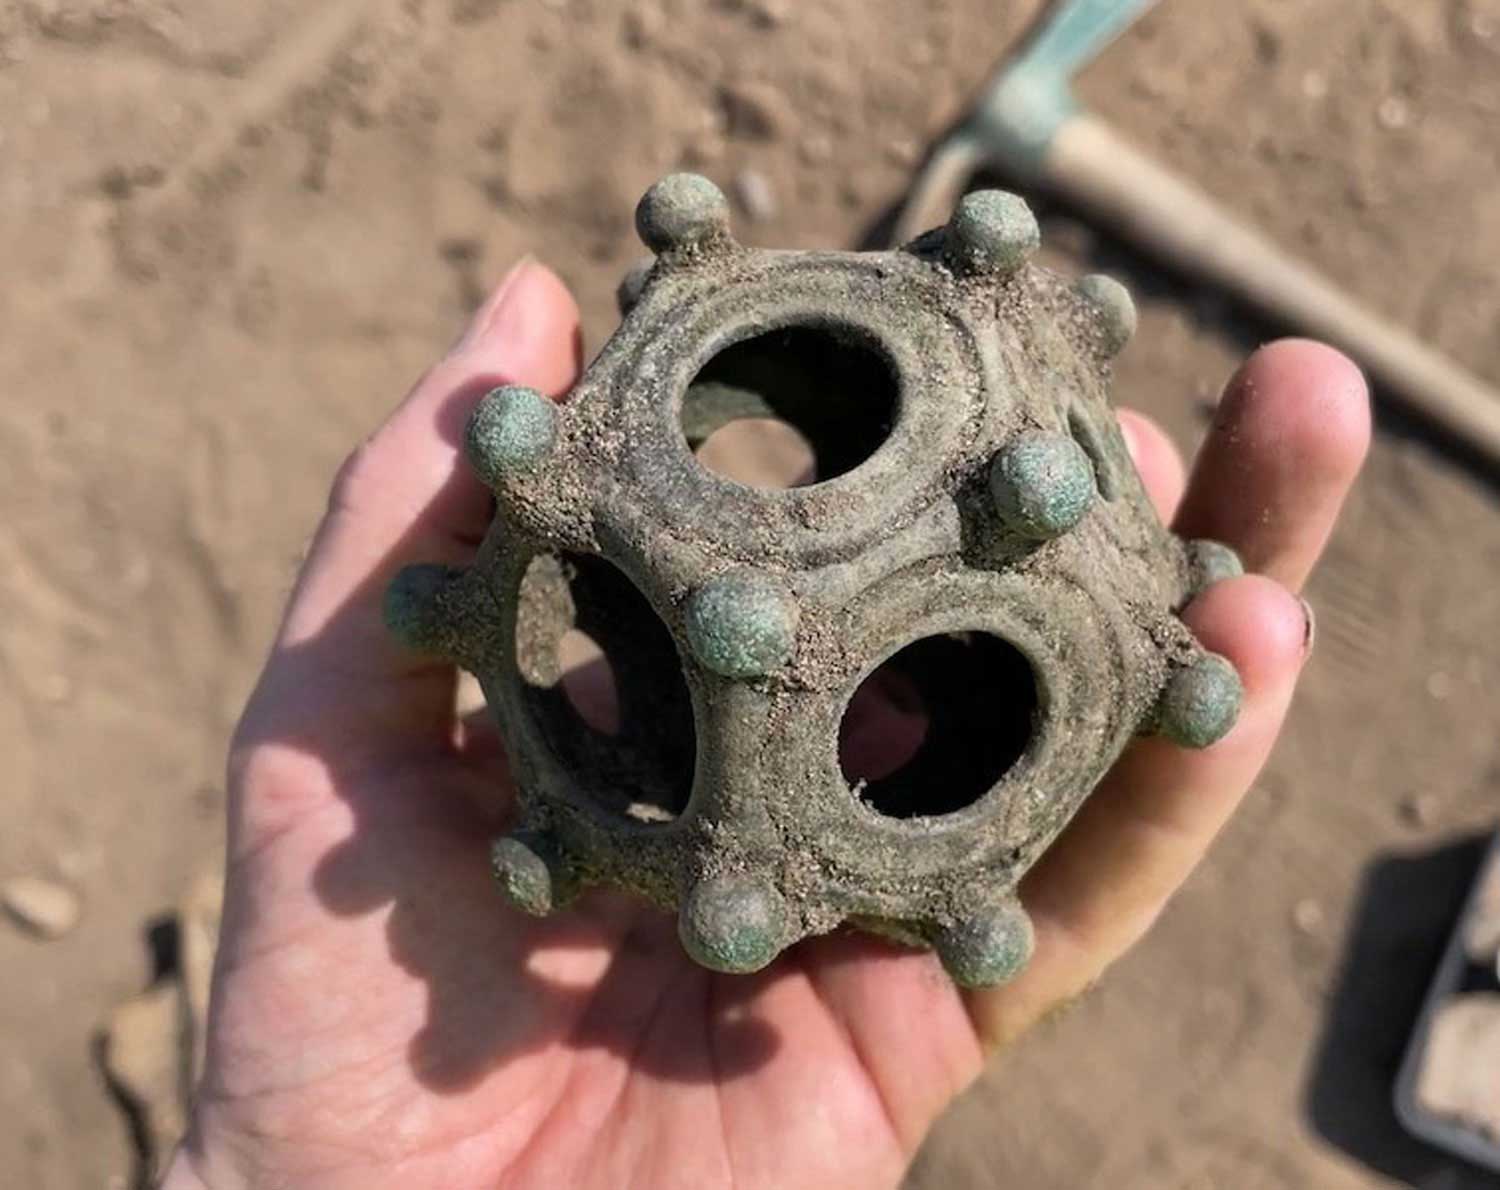 A metal dodecahedron is held in a hand at an archaeological site.